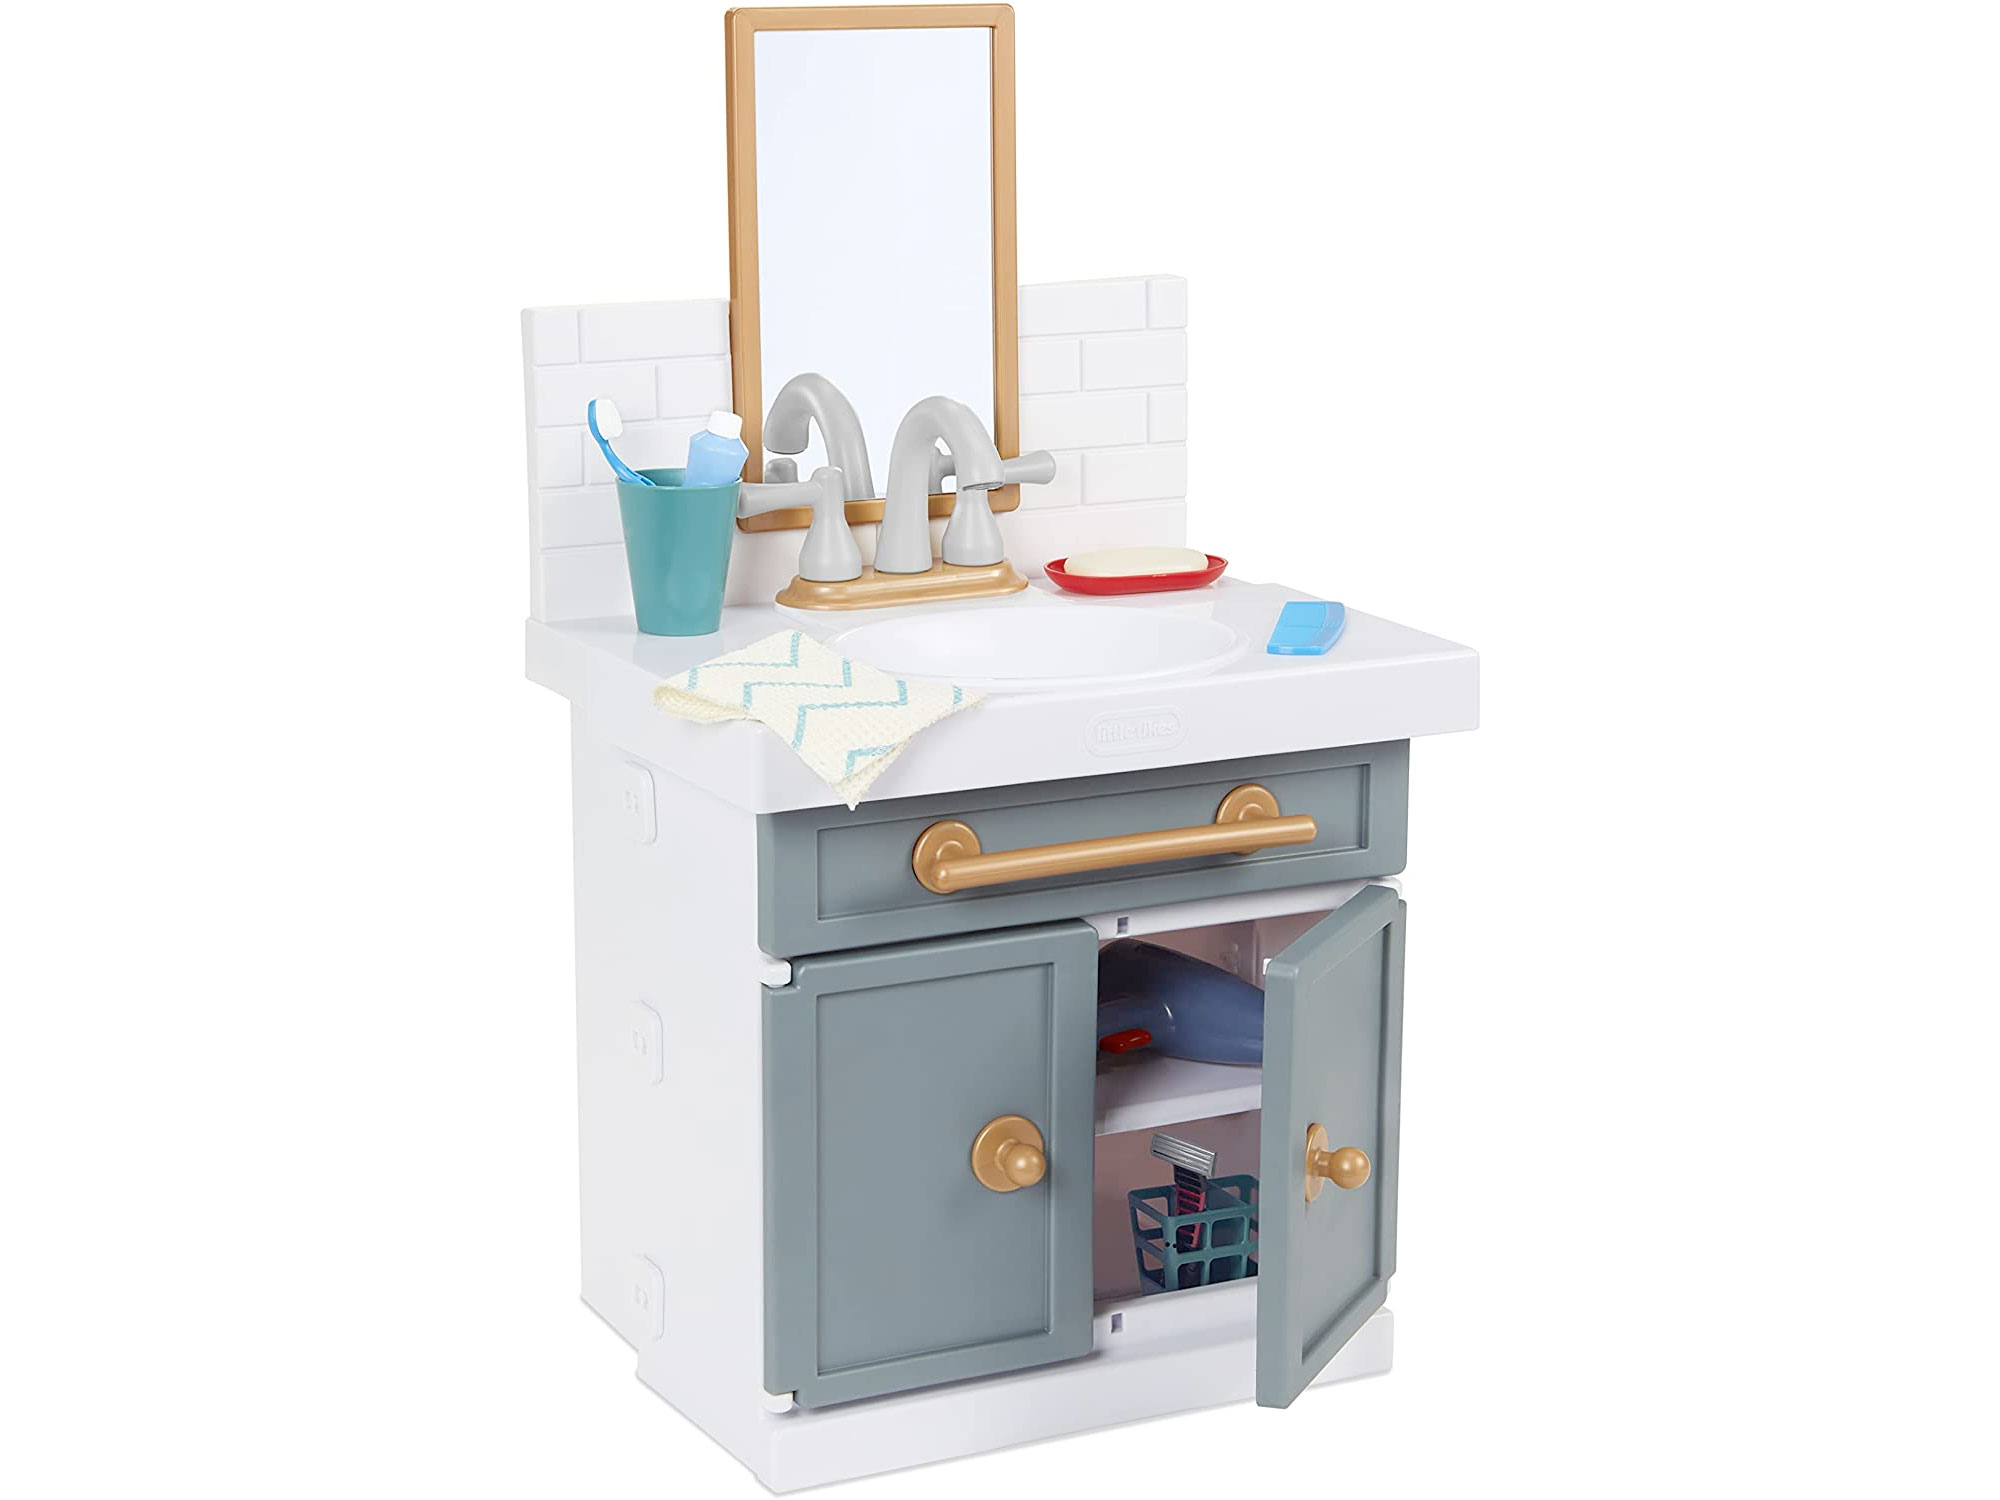 Amazon：Little Tikes First Bathroom Sink with Real Working Faucet只賣$55.99